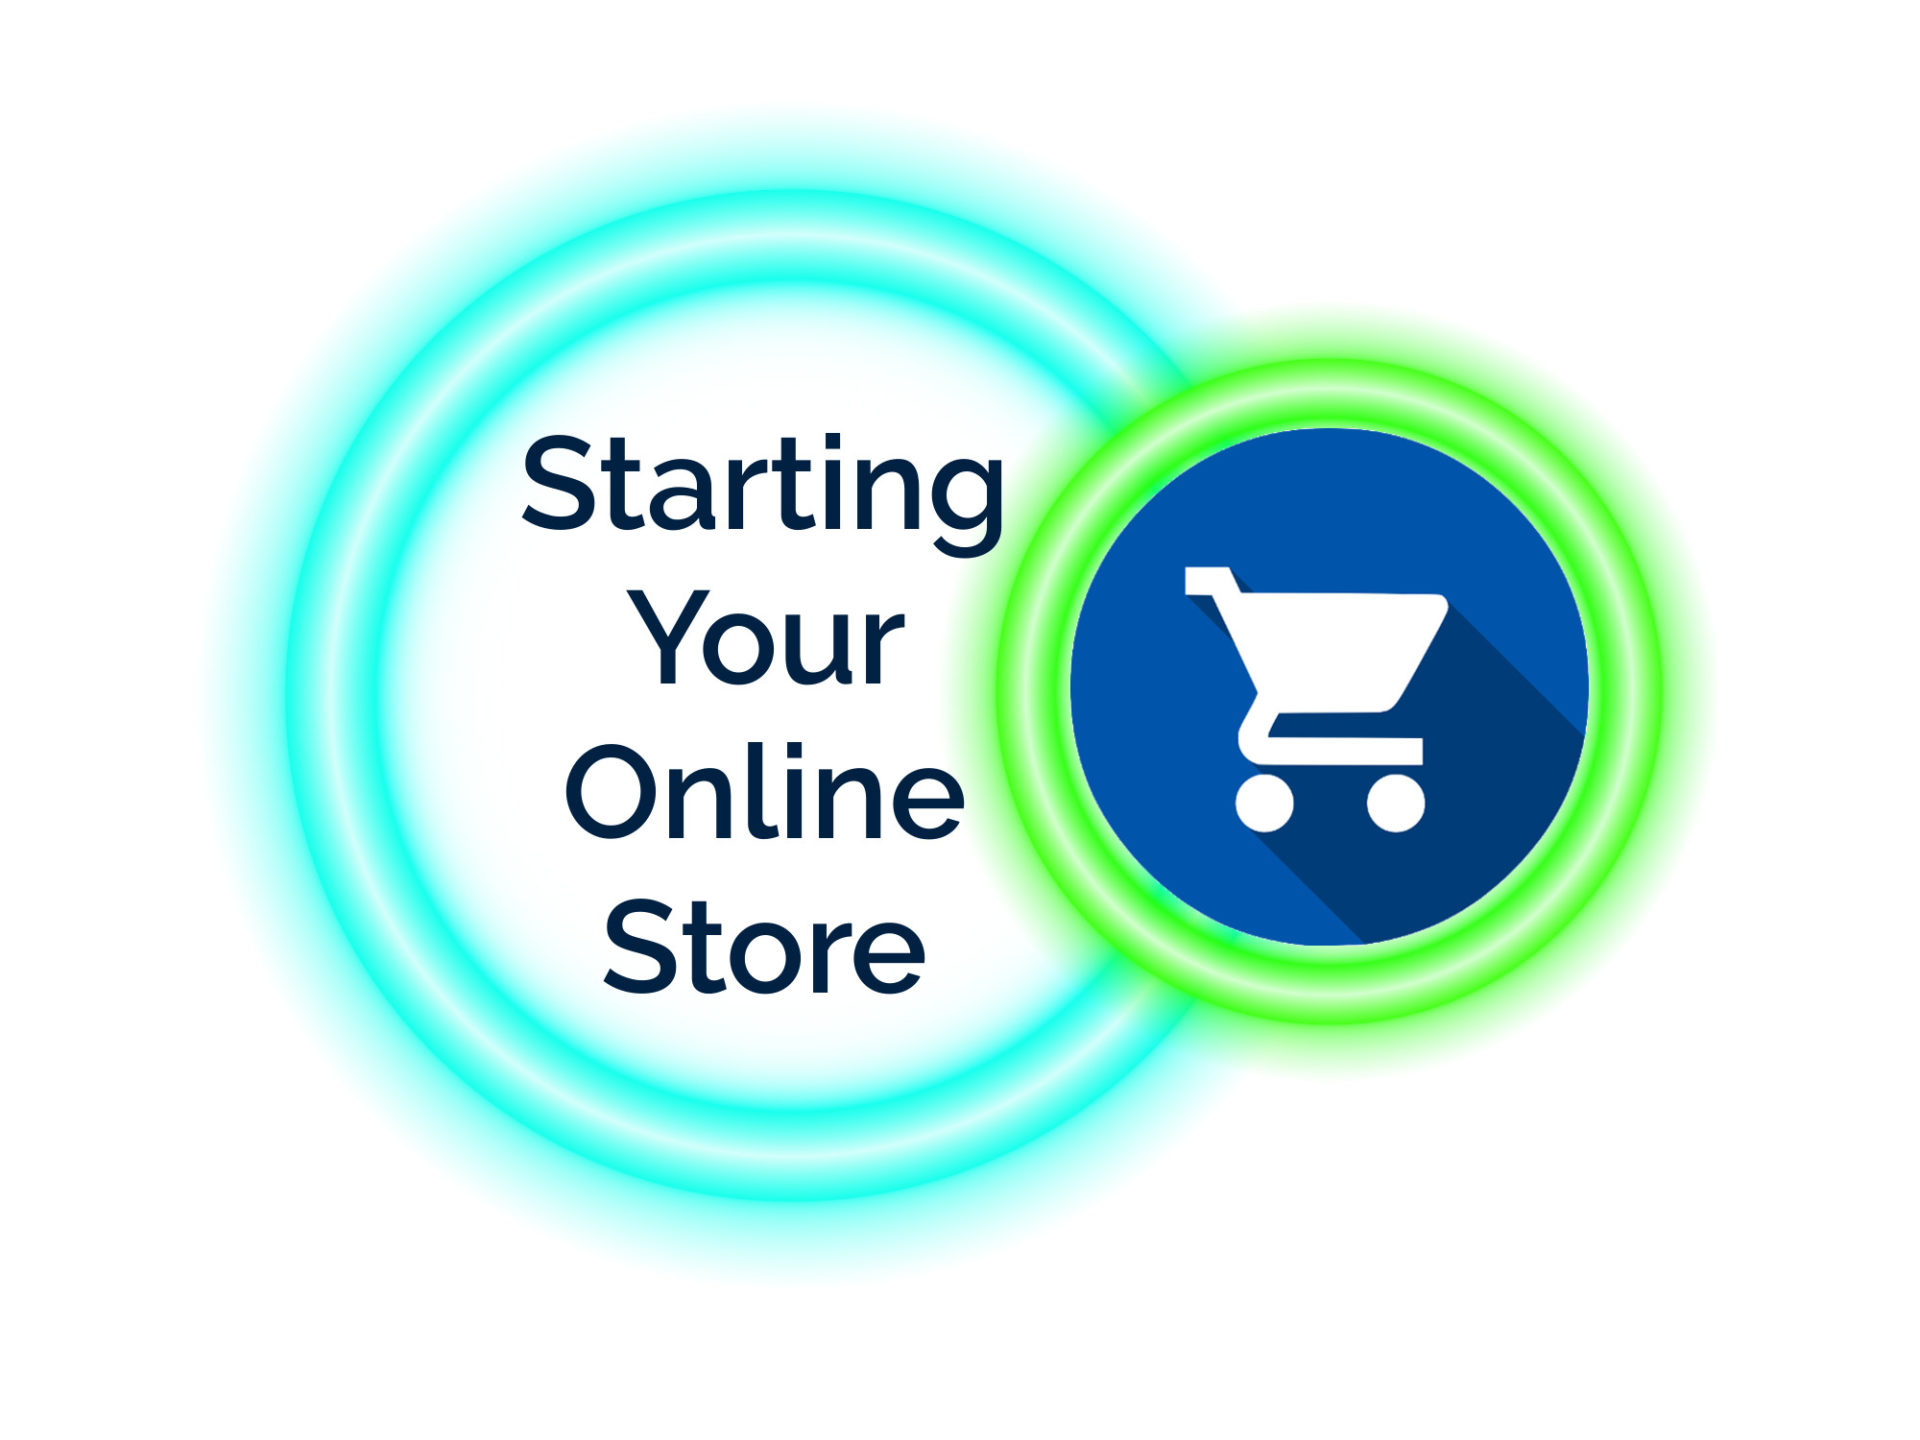 Starting Your Online Store with an image of a shopping cart inside 2 circles.